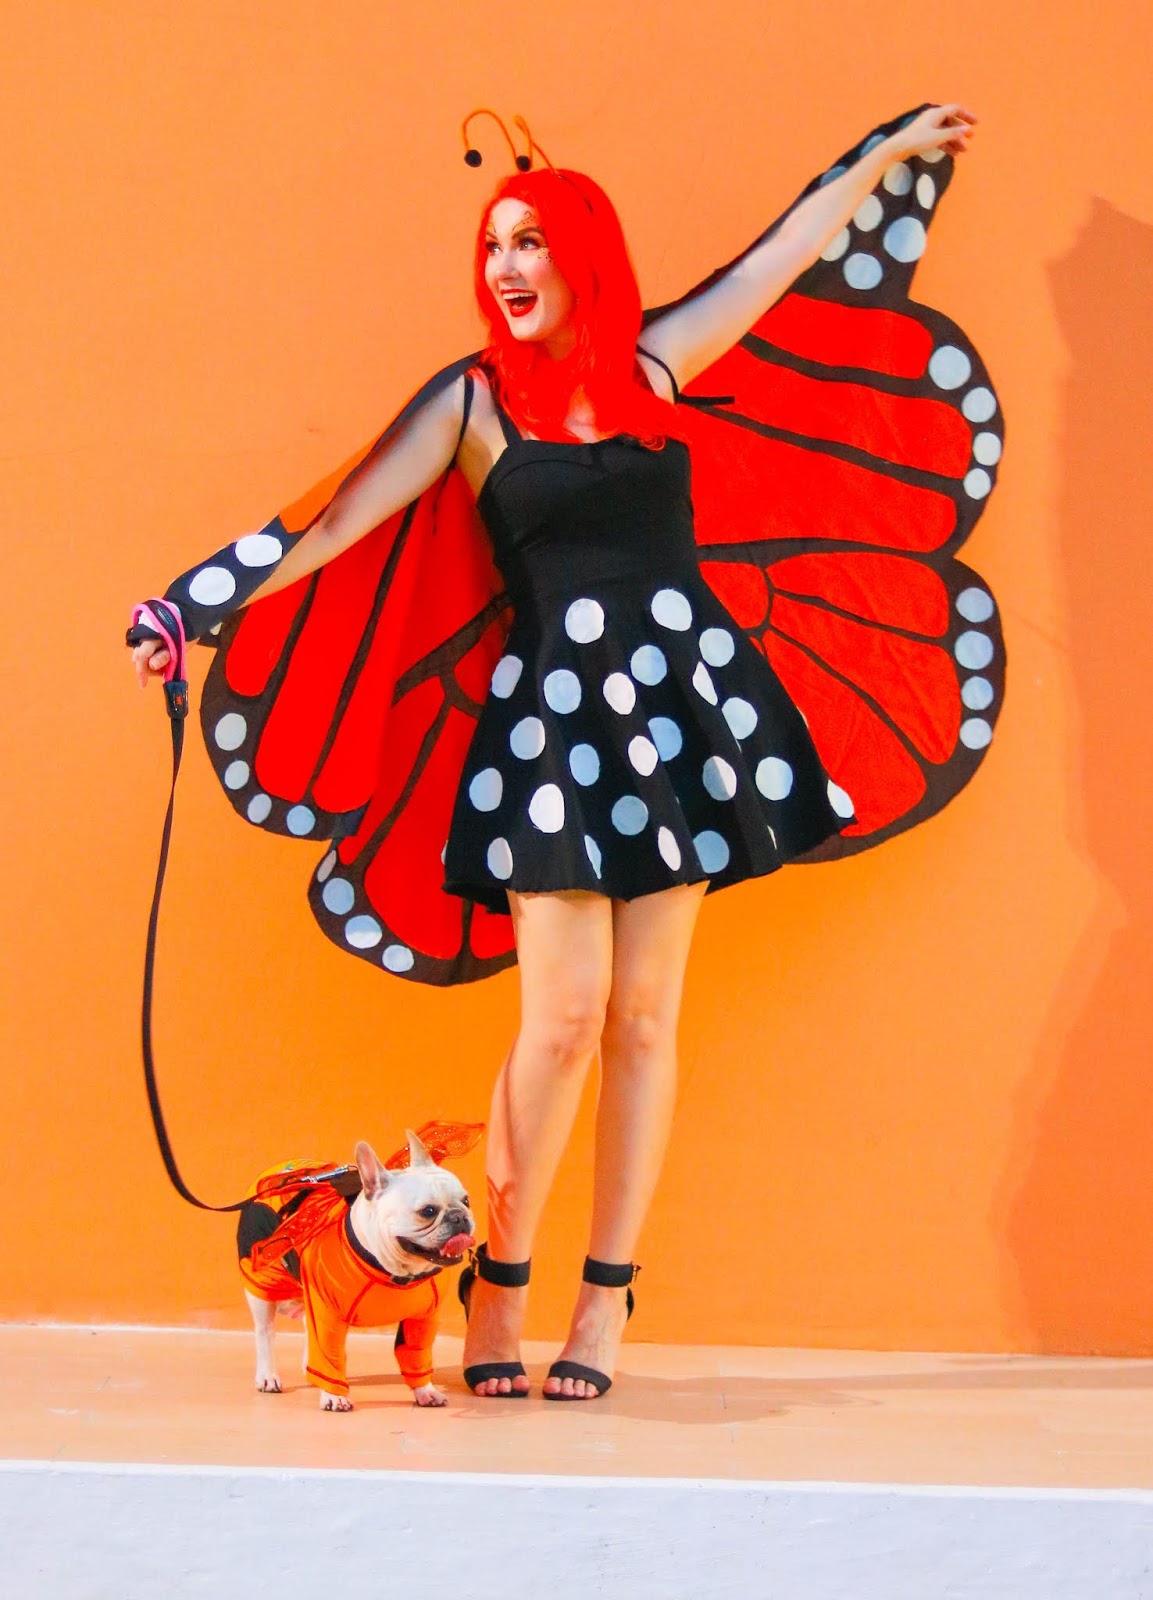 DIY Homemade Butterfly Costume Tutorial - Easy and cheap!